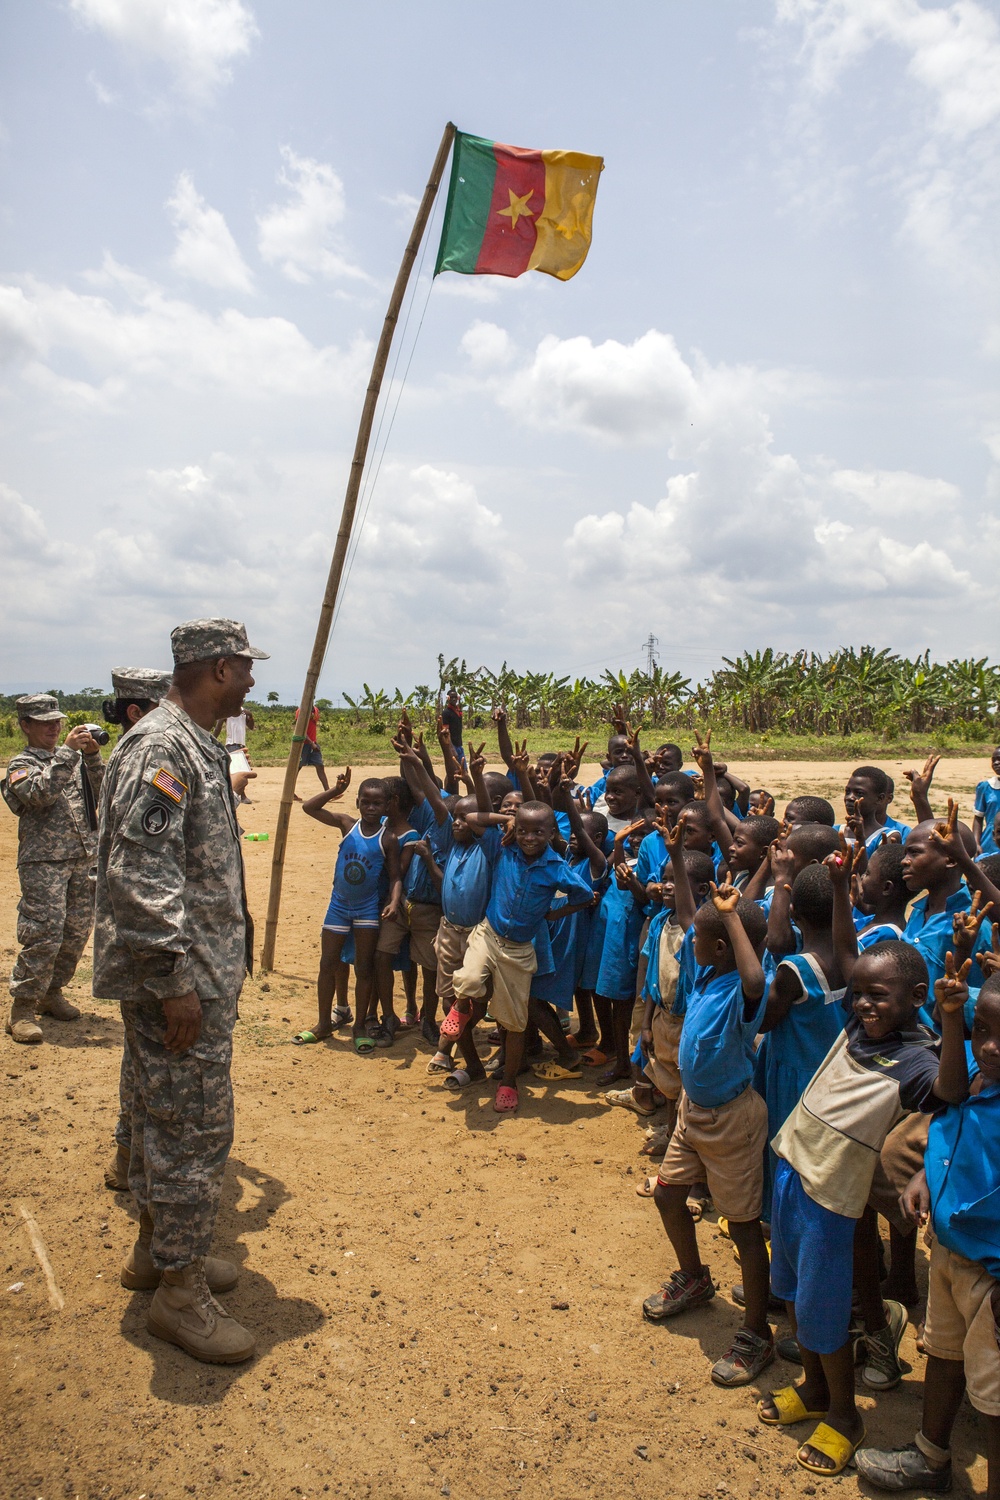 Central Accord 14: A partnership for a safe, stable, and secure Africa